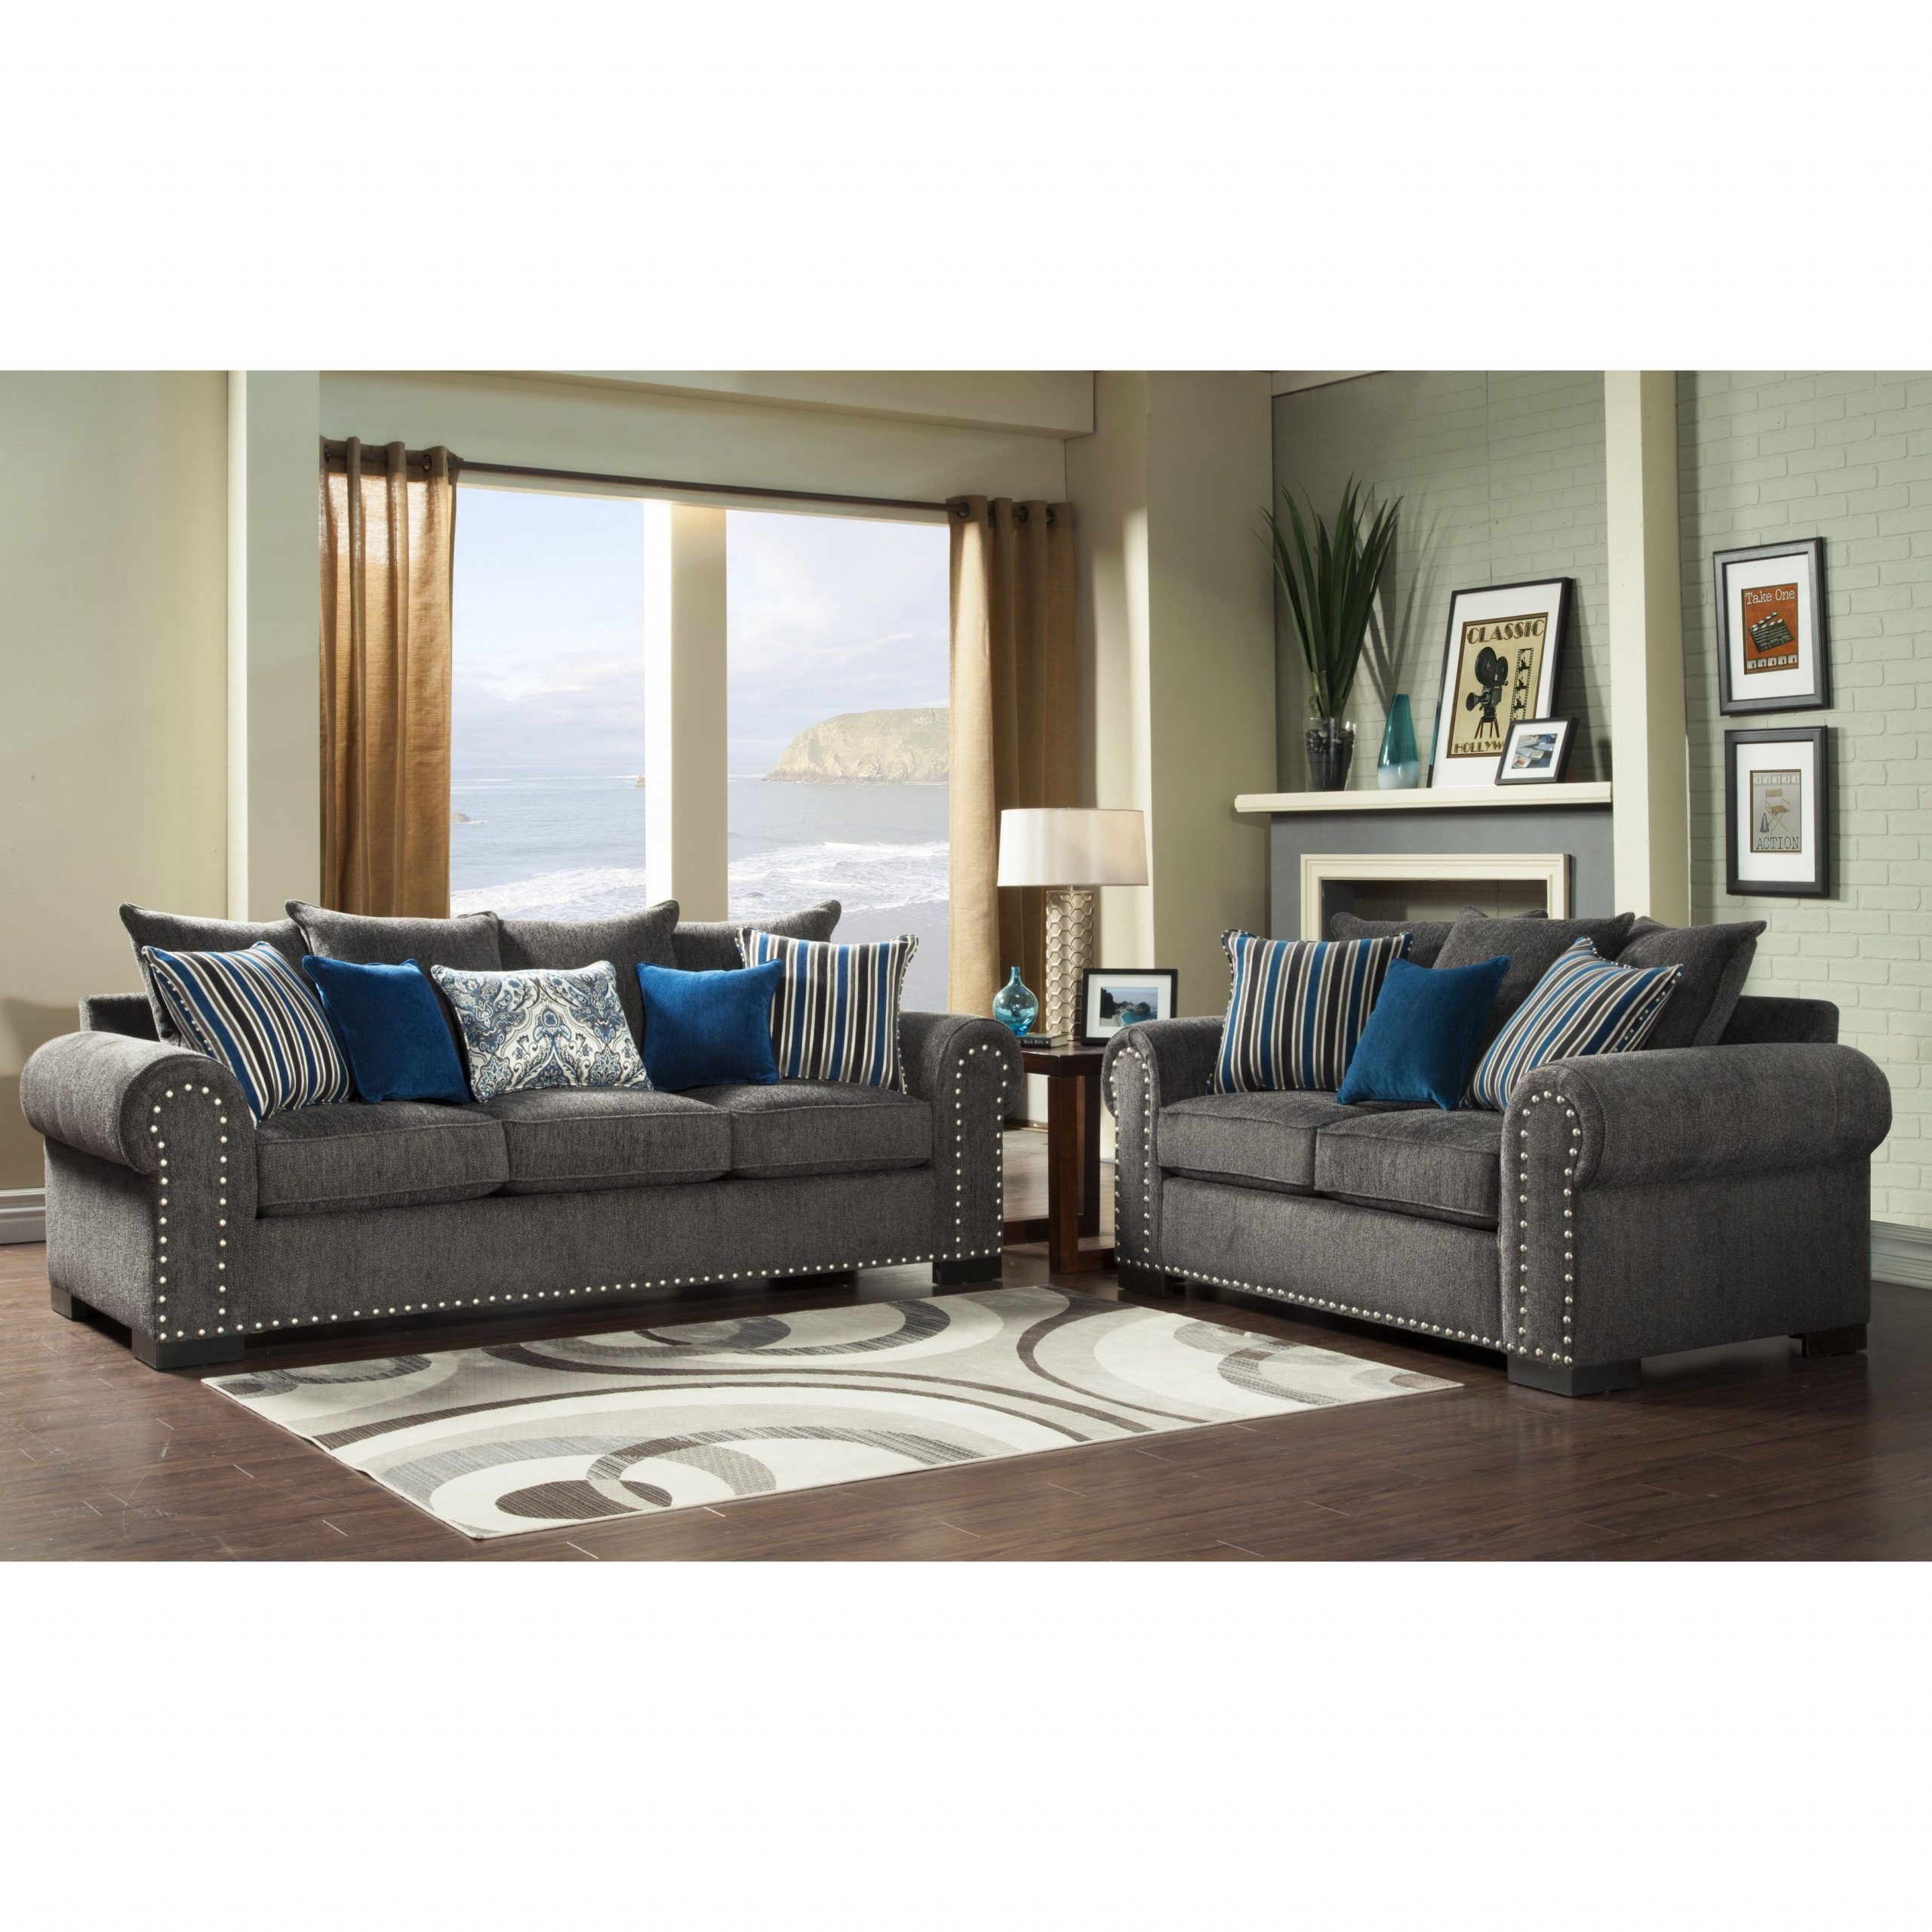 Our Best Living Room Furniture Deals | Sofa And Loveseat With Molnar Upholstered Sectional Sofas Blue/Gray (View 9 of 15)